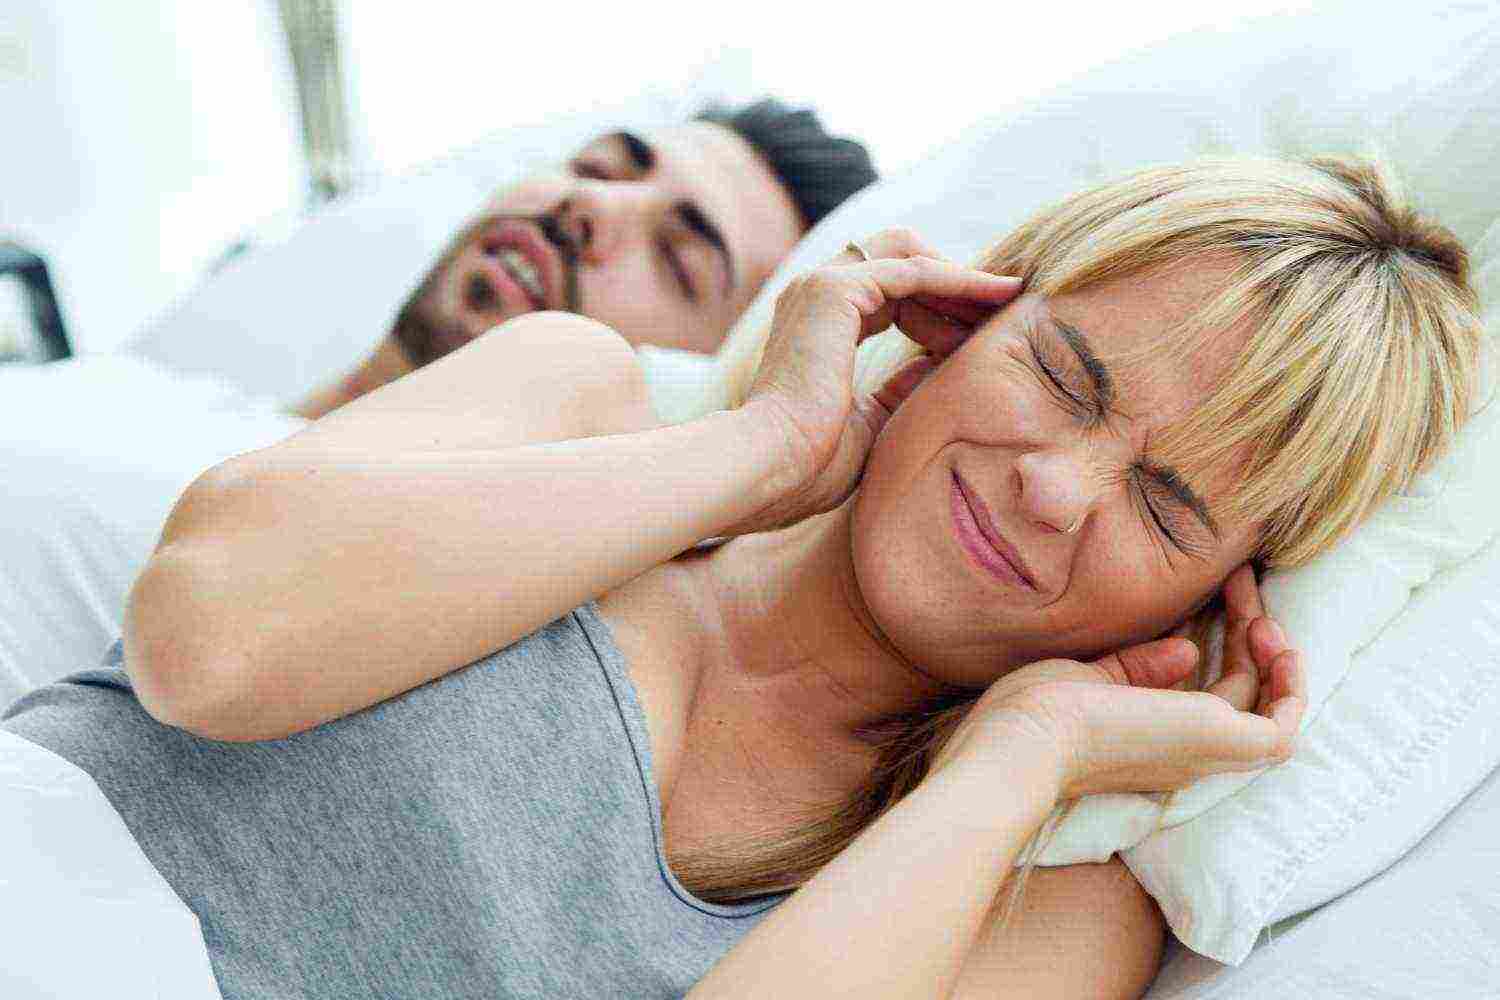 "My Husband Only Works And Sleeps": What to Do About It